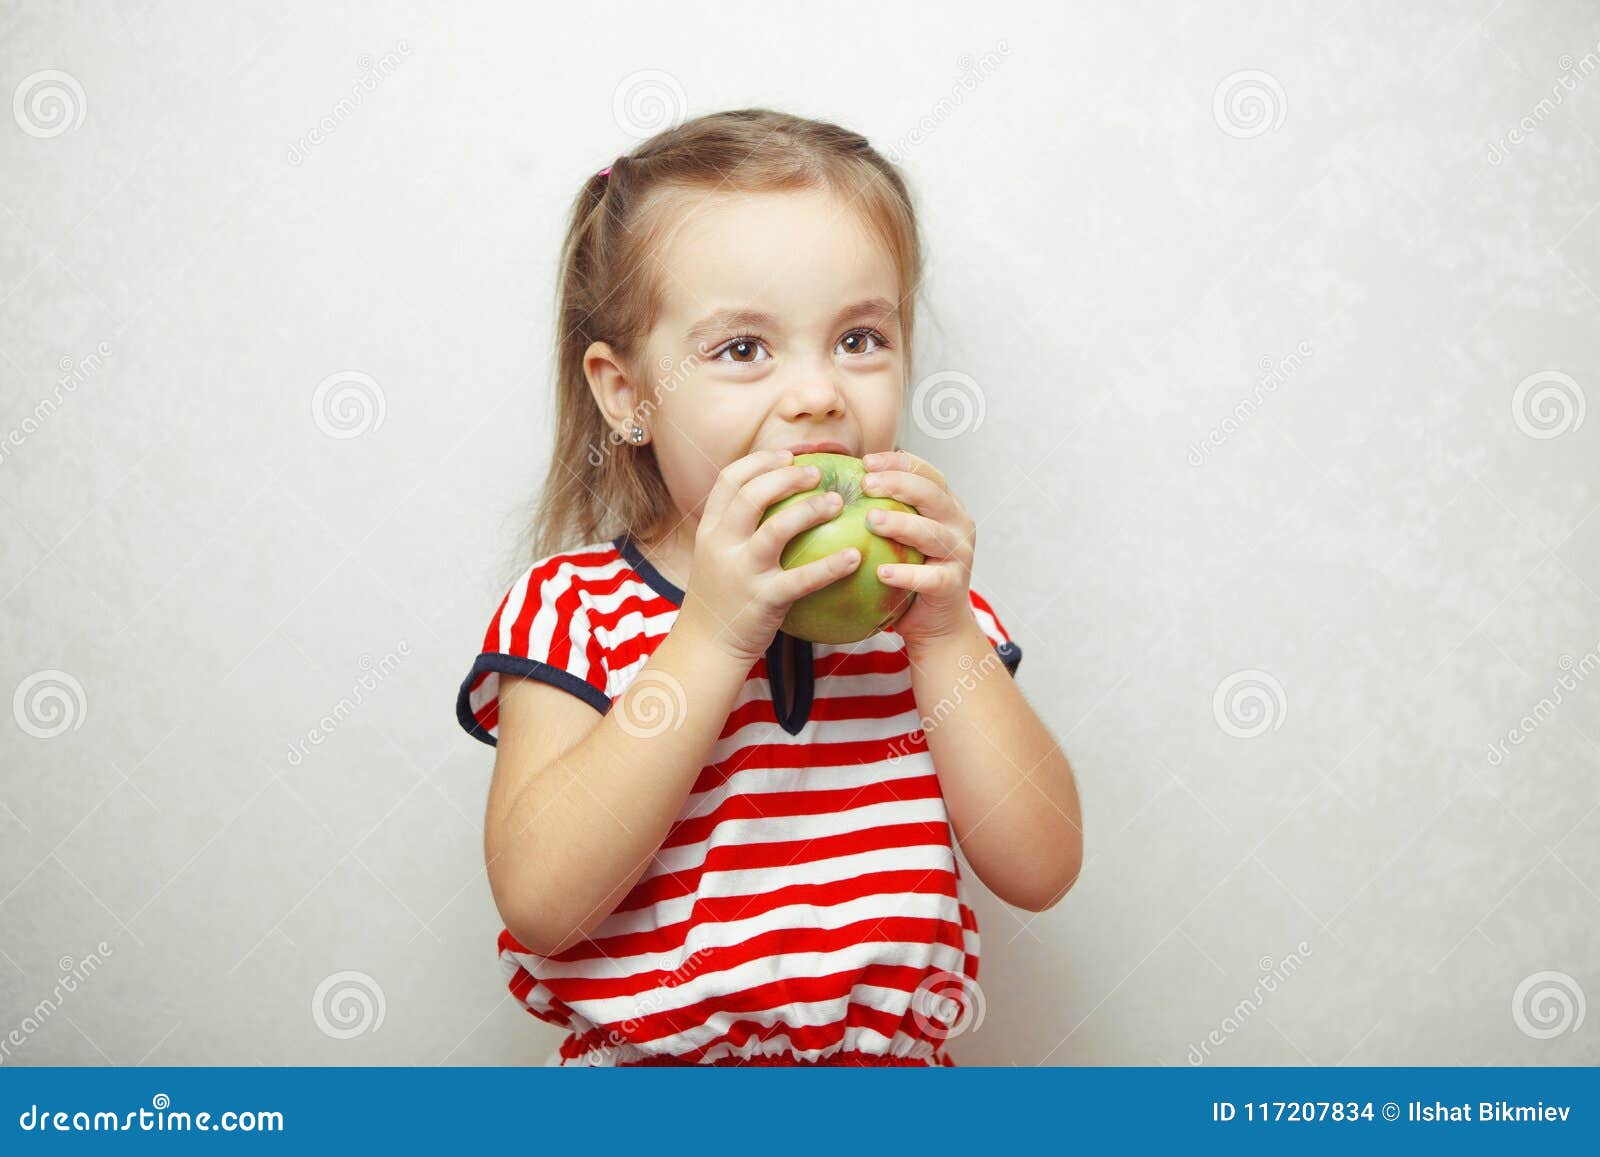 Kid with Cute Hairstyle Holding and Eating Green Apple Stock Photo - Image  of child, dress: 117207834